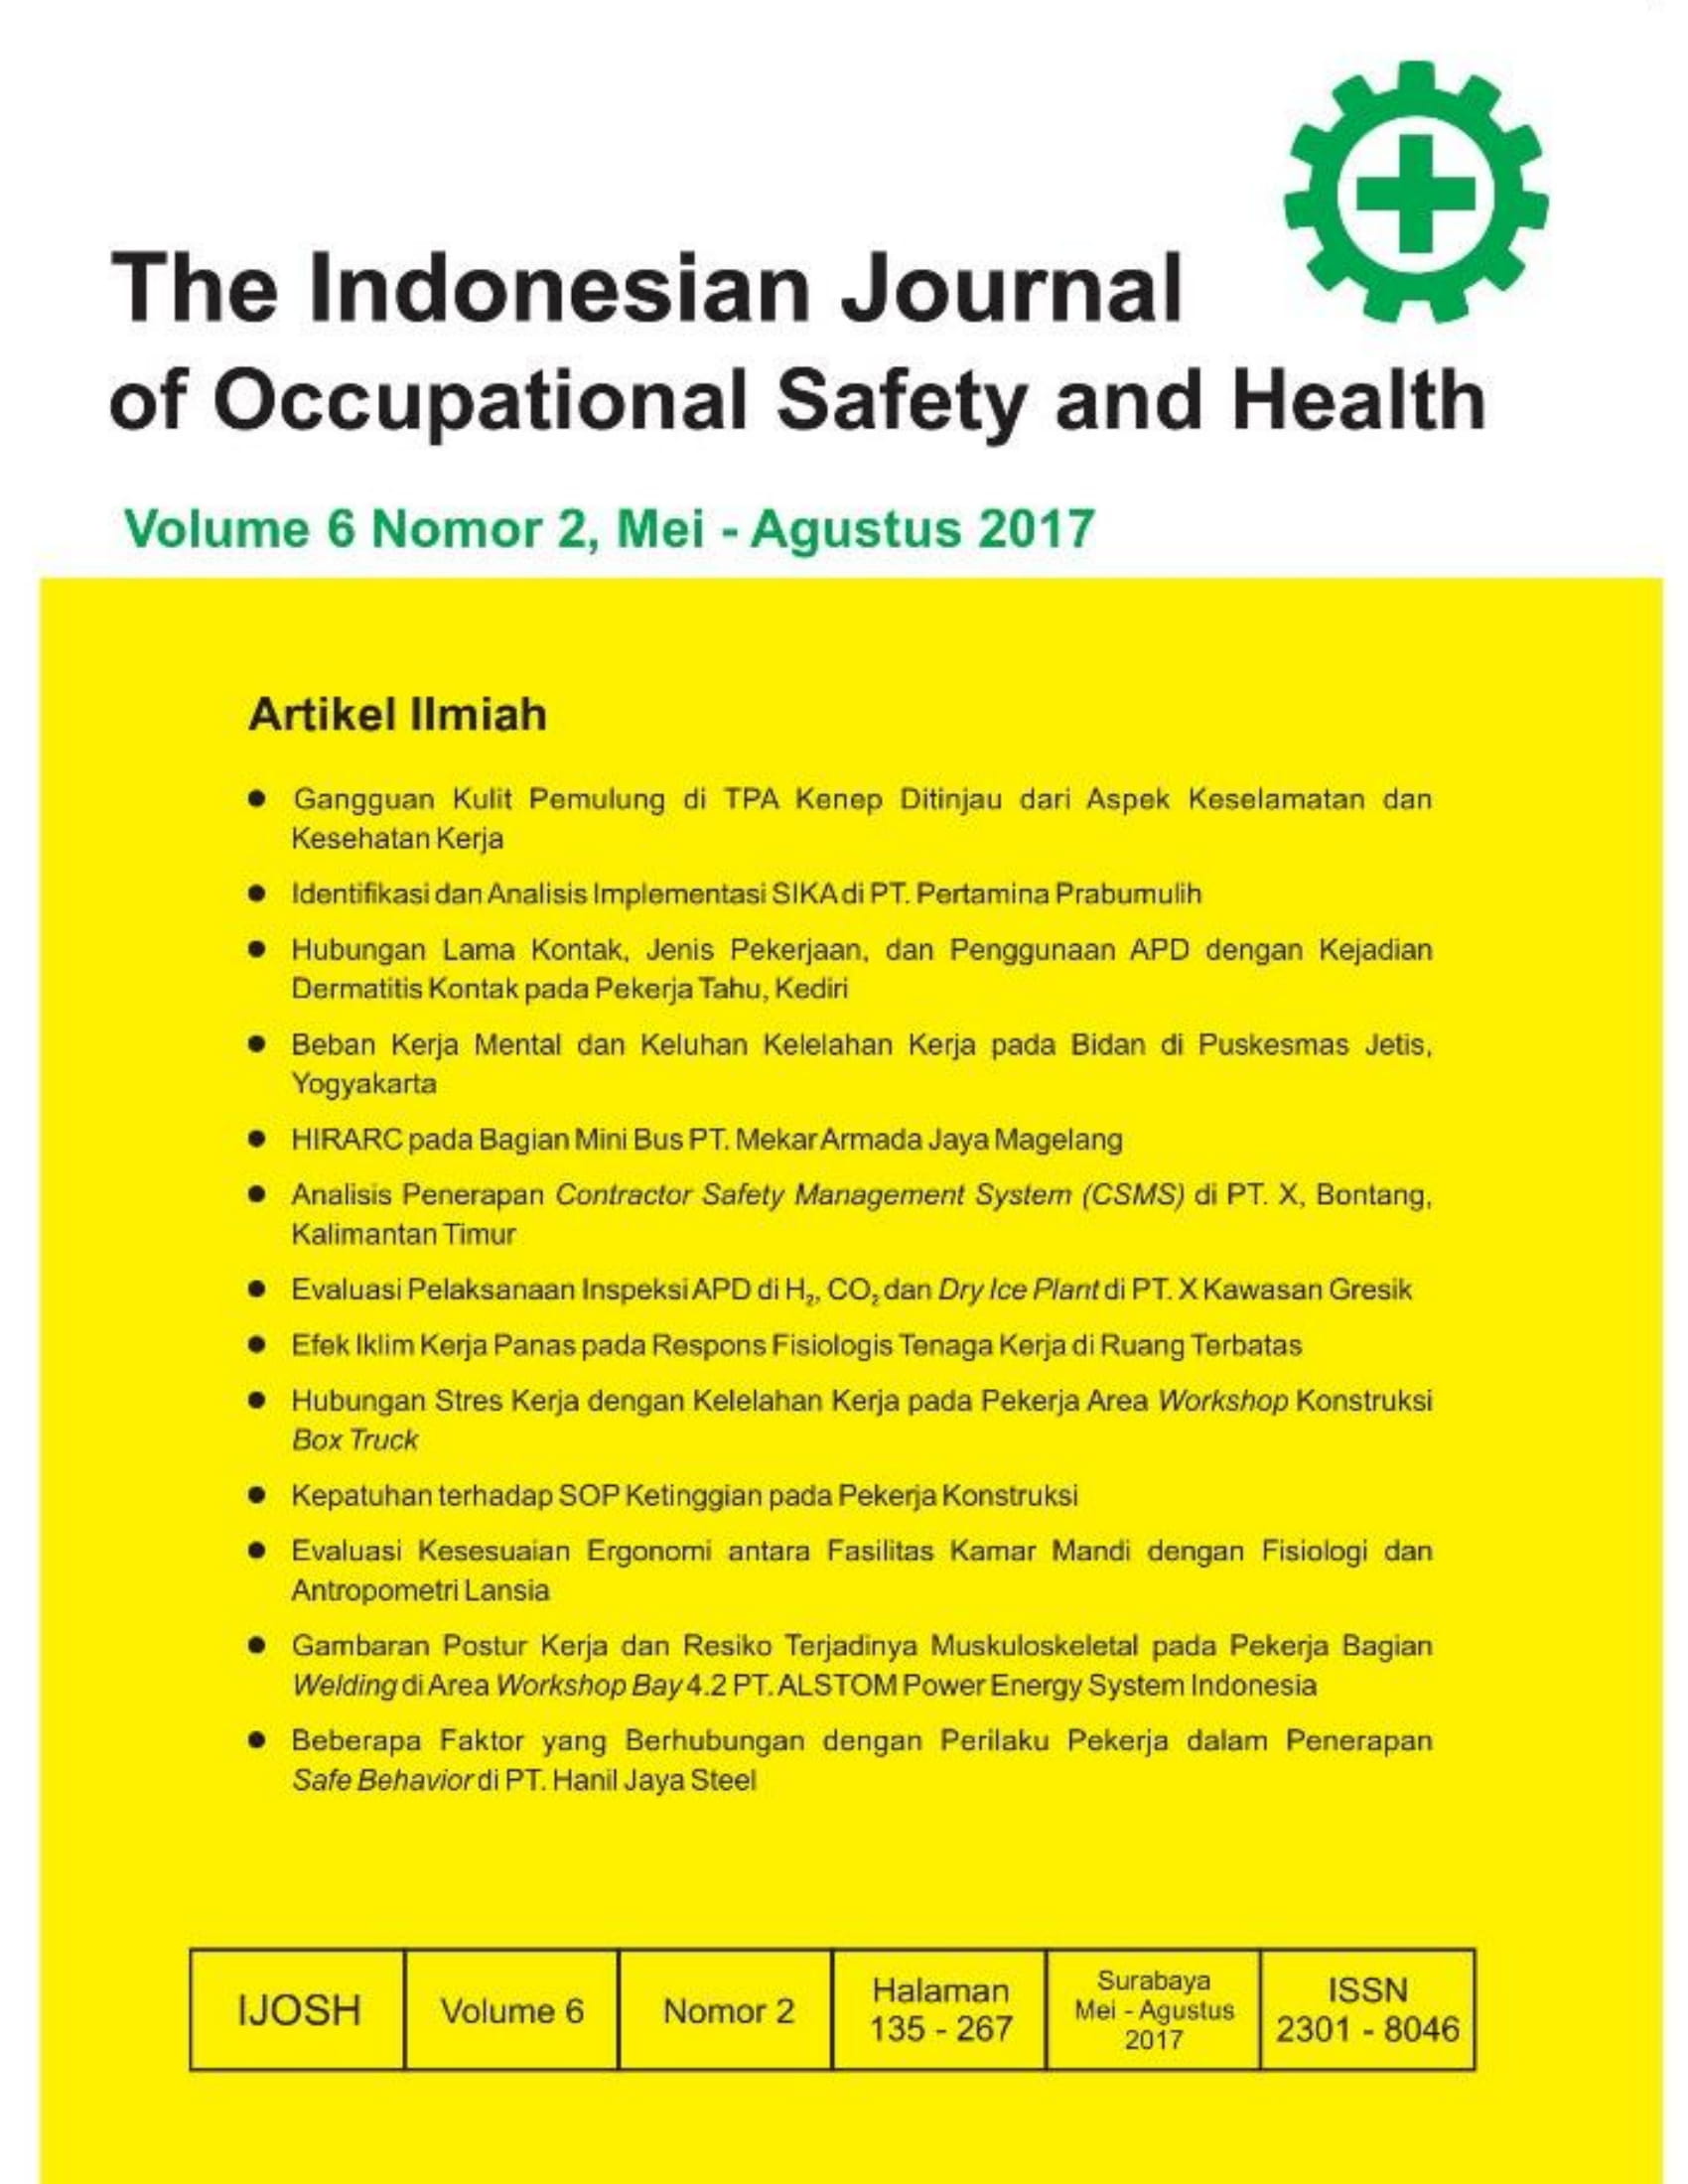 						View Vol. 6 No. 2 (2017): The Indonesian Journal Of Occupational Safety and Health
					